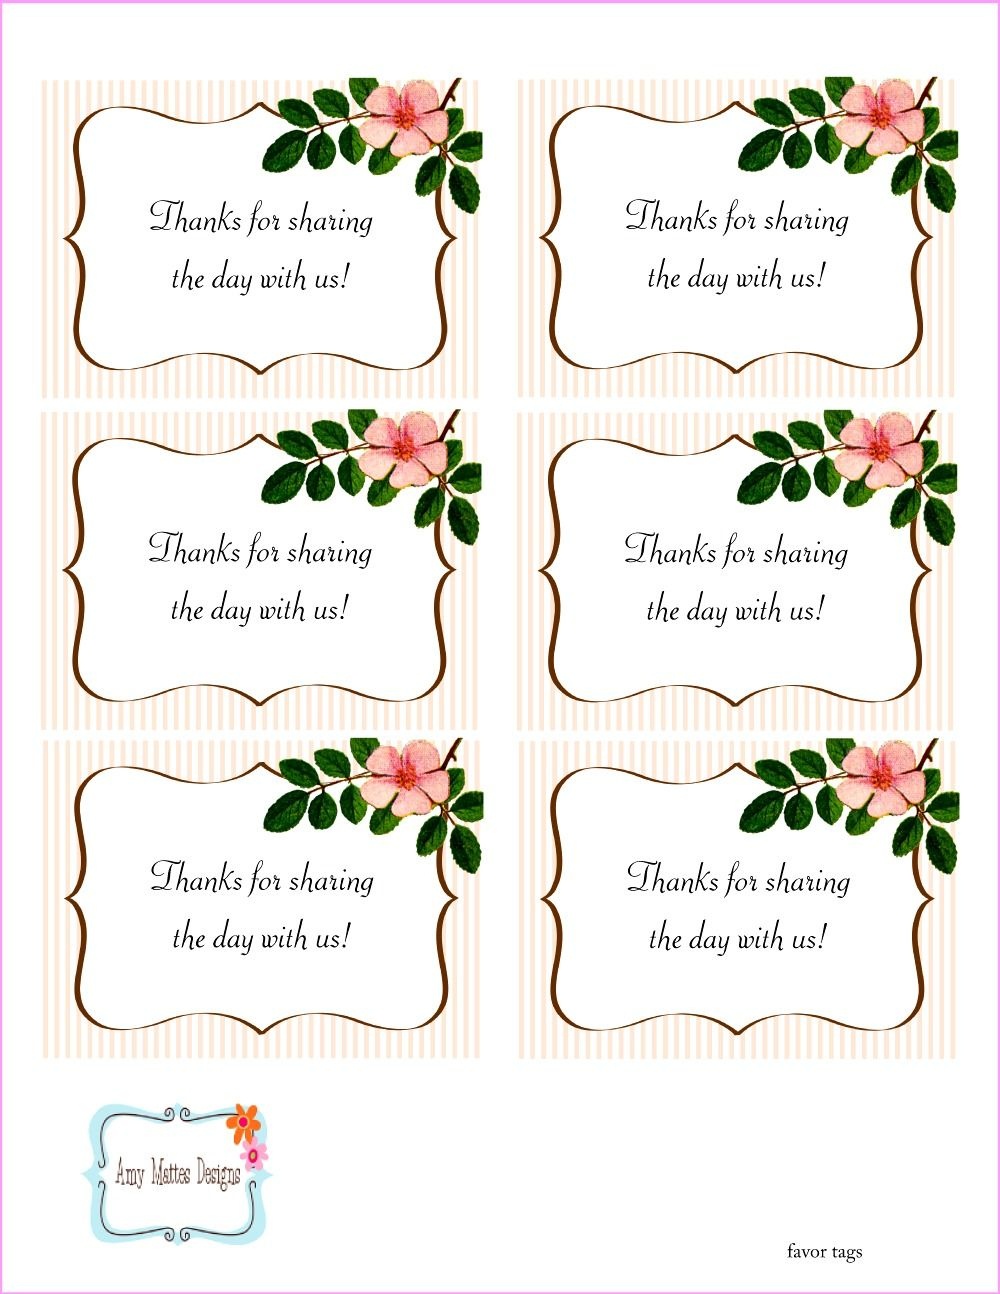 The Beautiful Wedding Favor Tags As Our Identity: Free Printable - Free Printable Wedding Thank You Tags